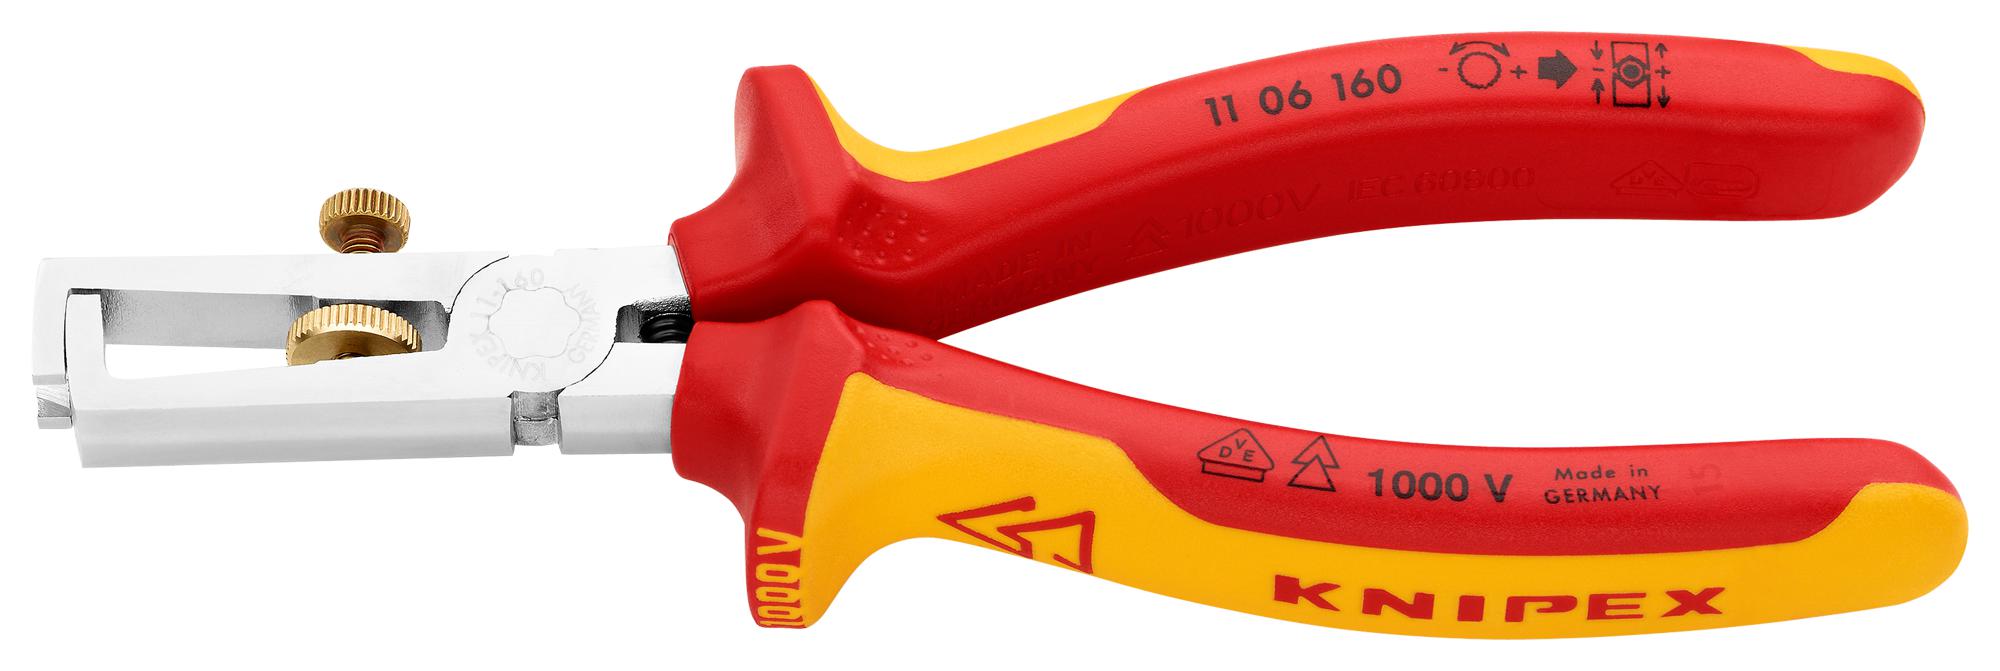 11 06 160 WIRE STRIPPING PLIER KNIPEX